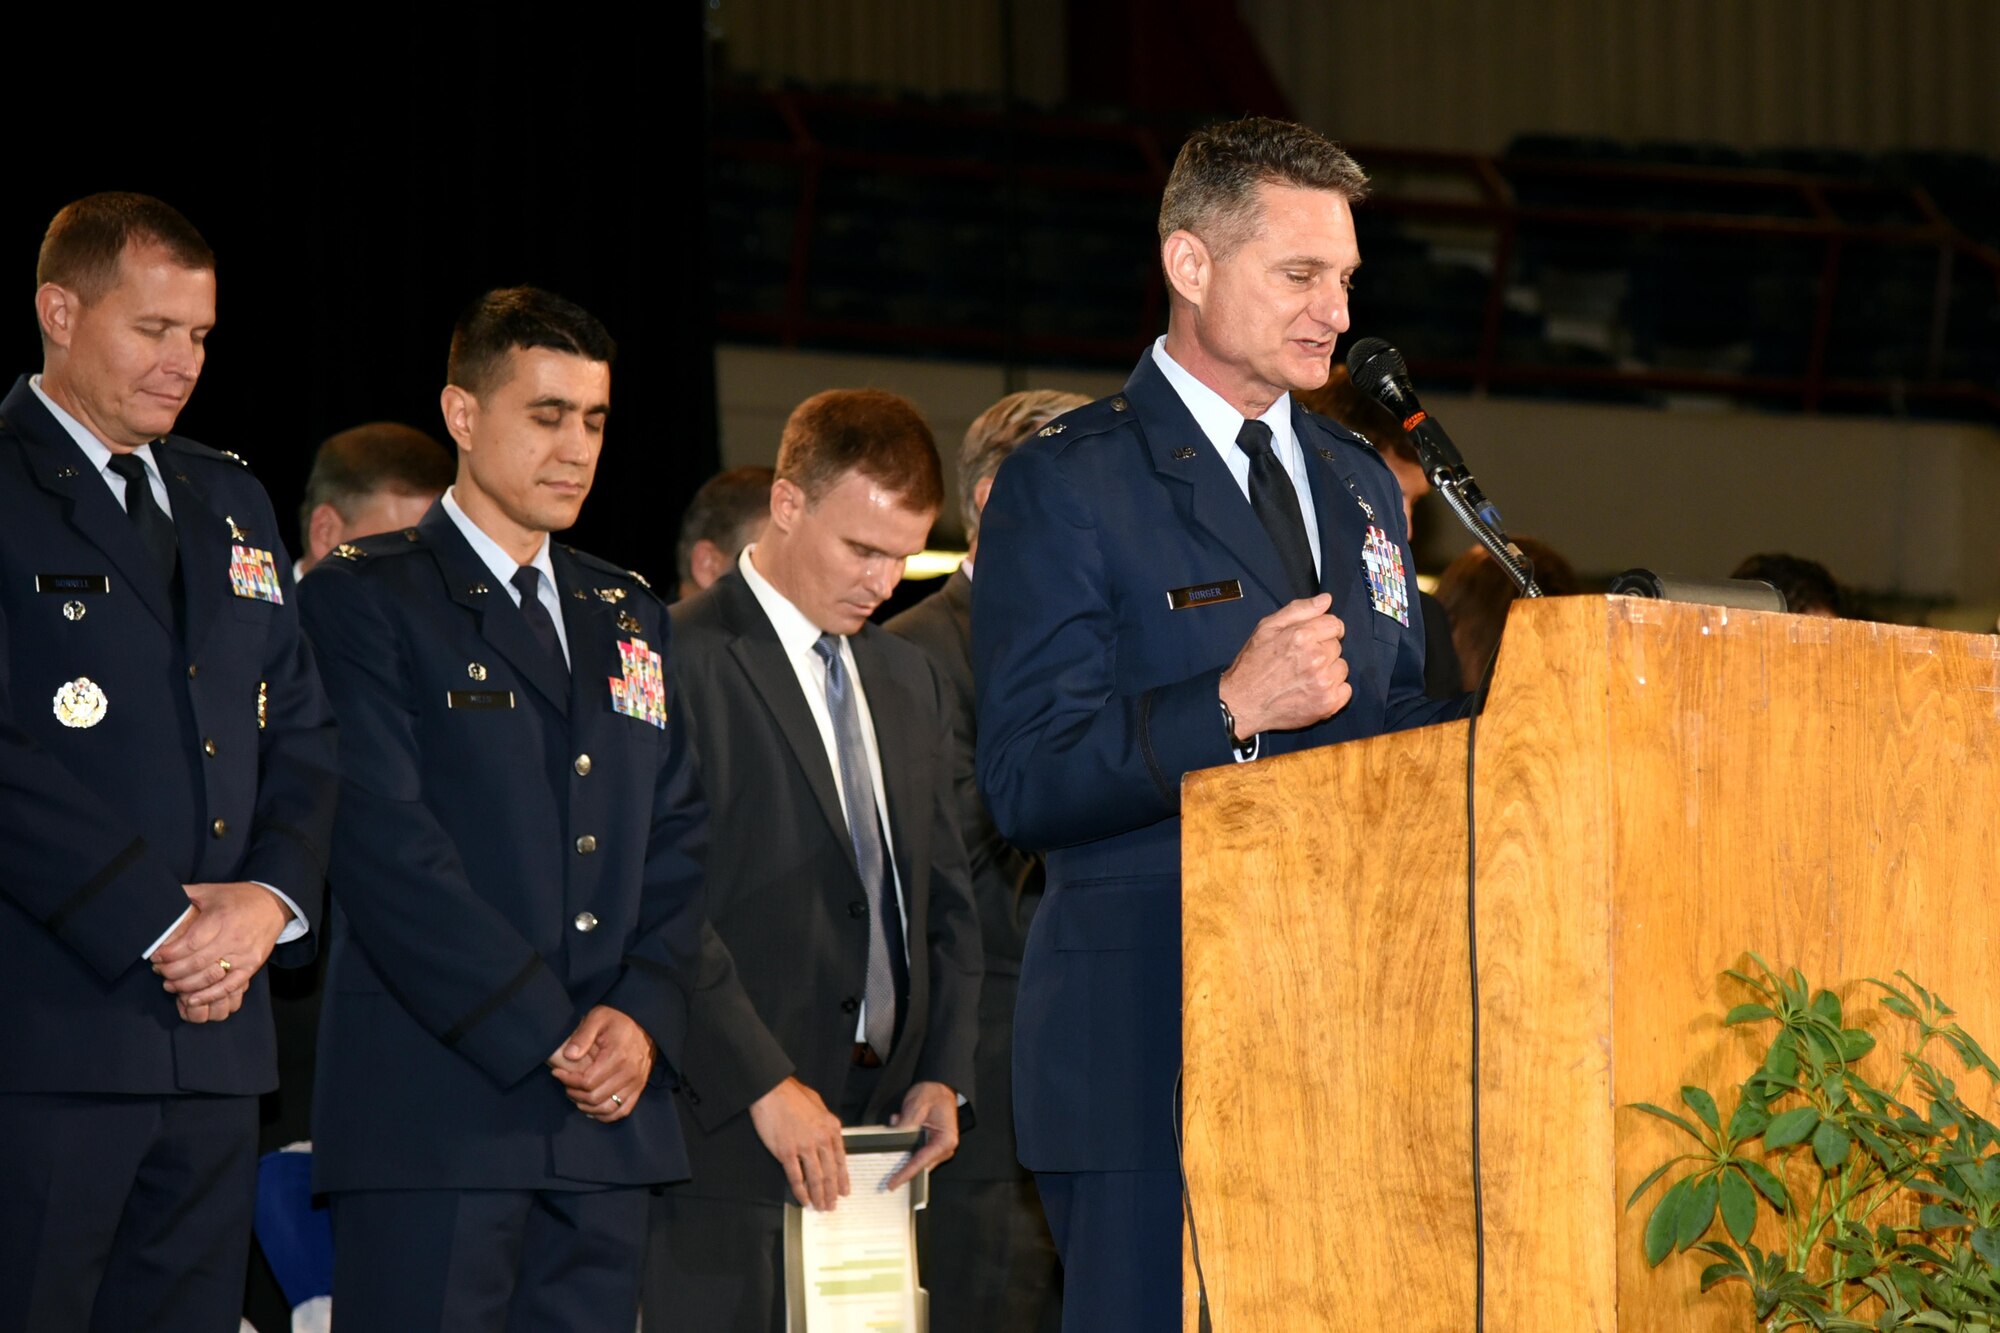 U.S. Air Force Lt. Col. Robert Borger, 17th Training Wing chaplain, offers the invocation for the San Angelo Independent School District annual convocation signifying the kickoff of the 2017-2018 school year at the Foster Communications Colosseum, San Angelo, Texas, Aug. 15, 2017.